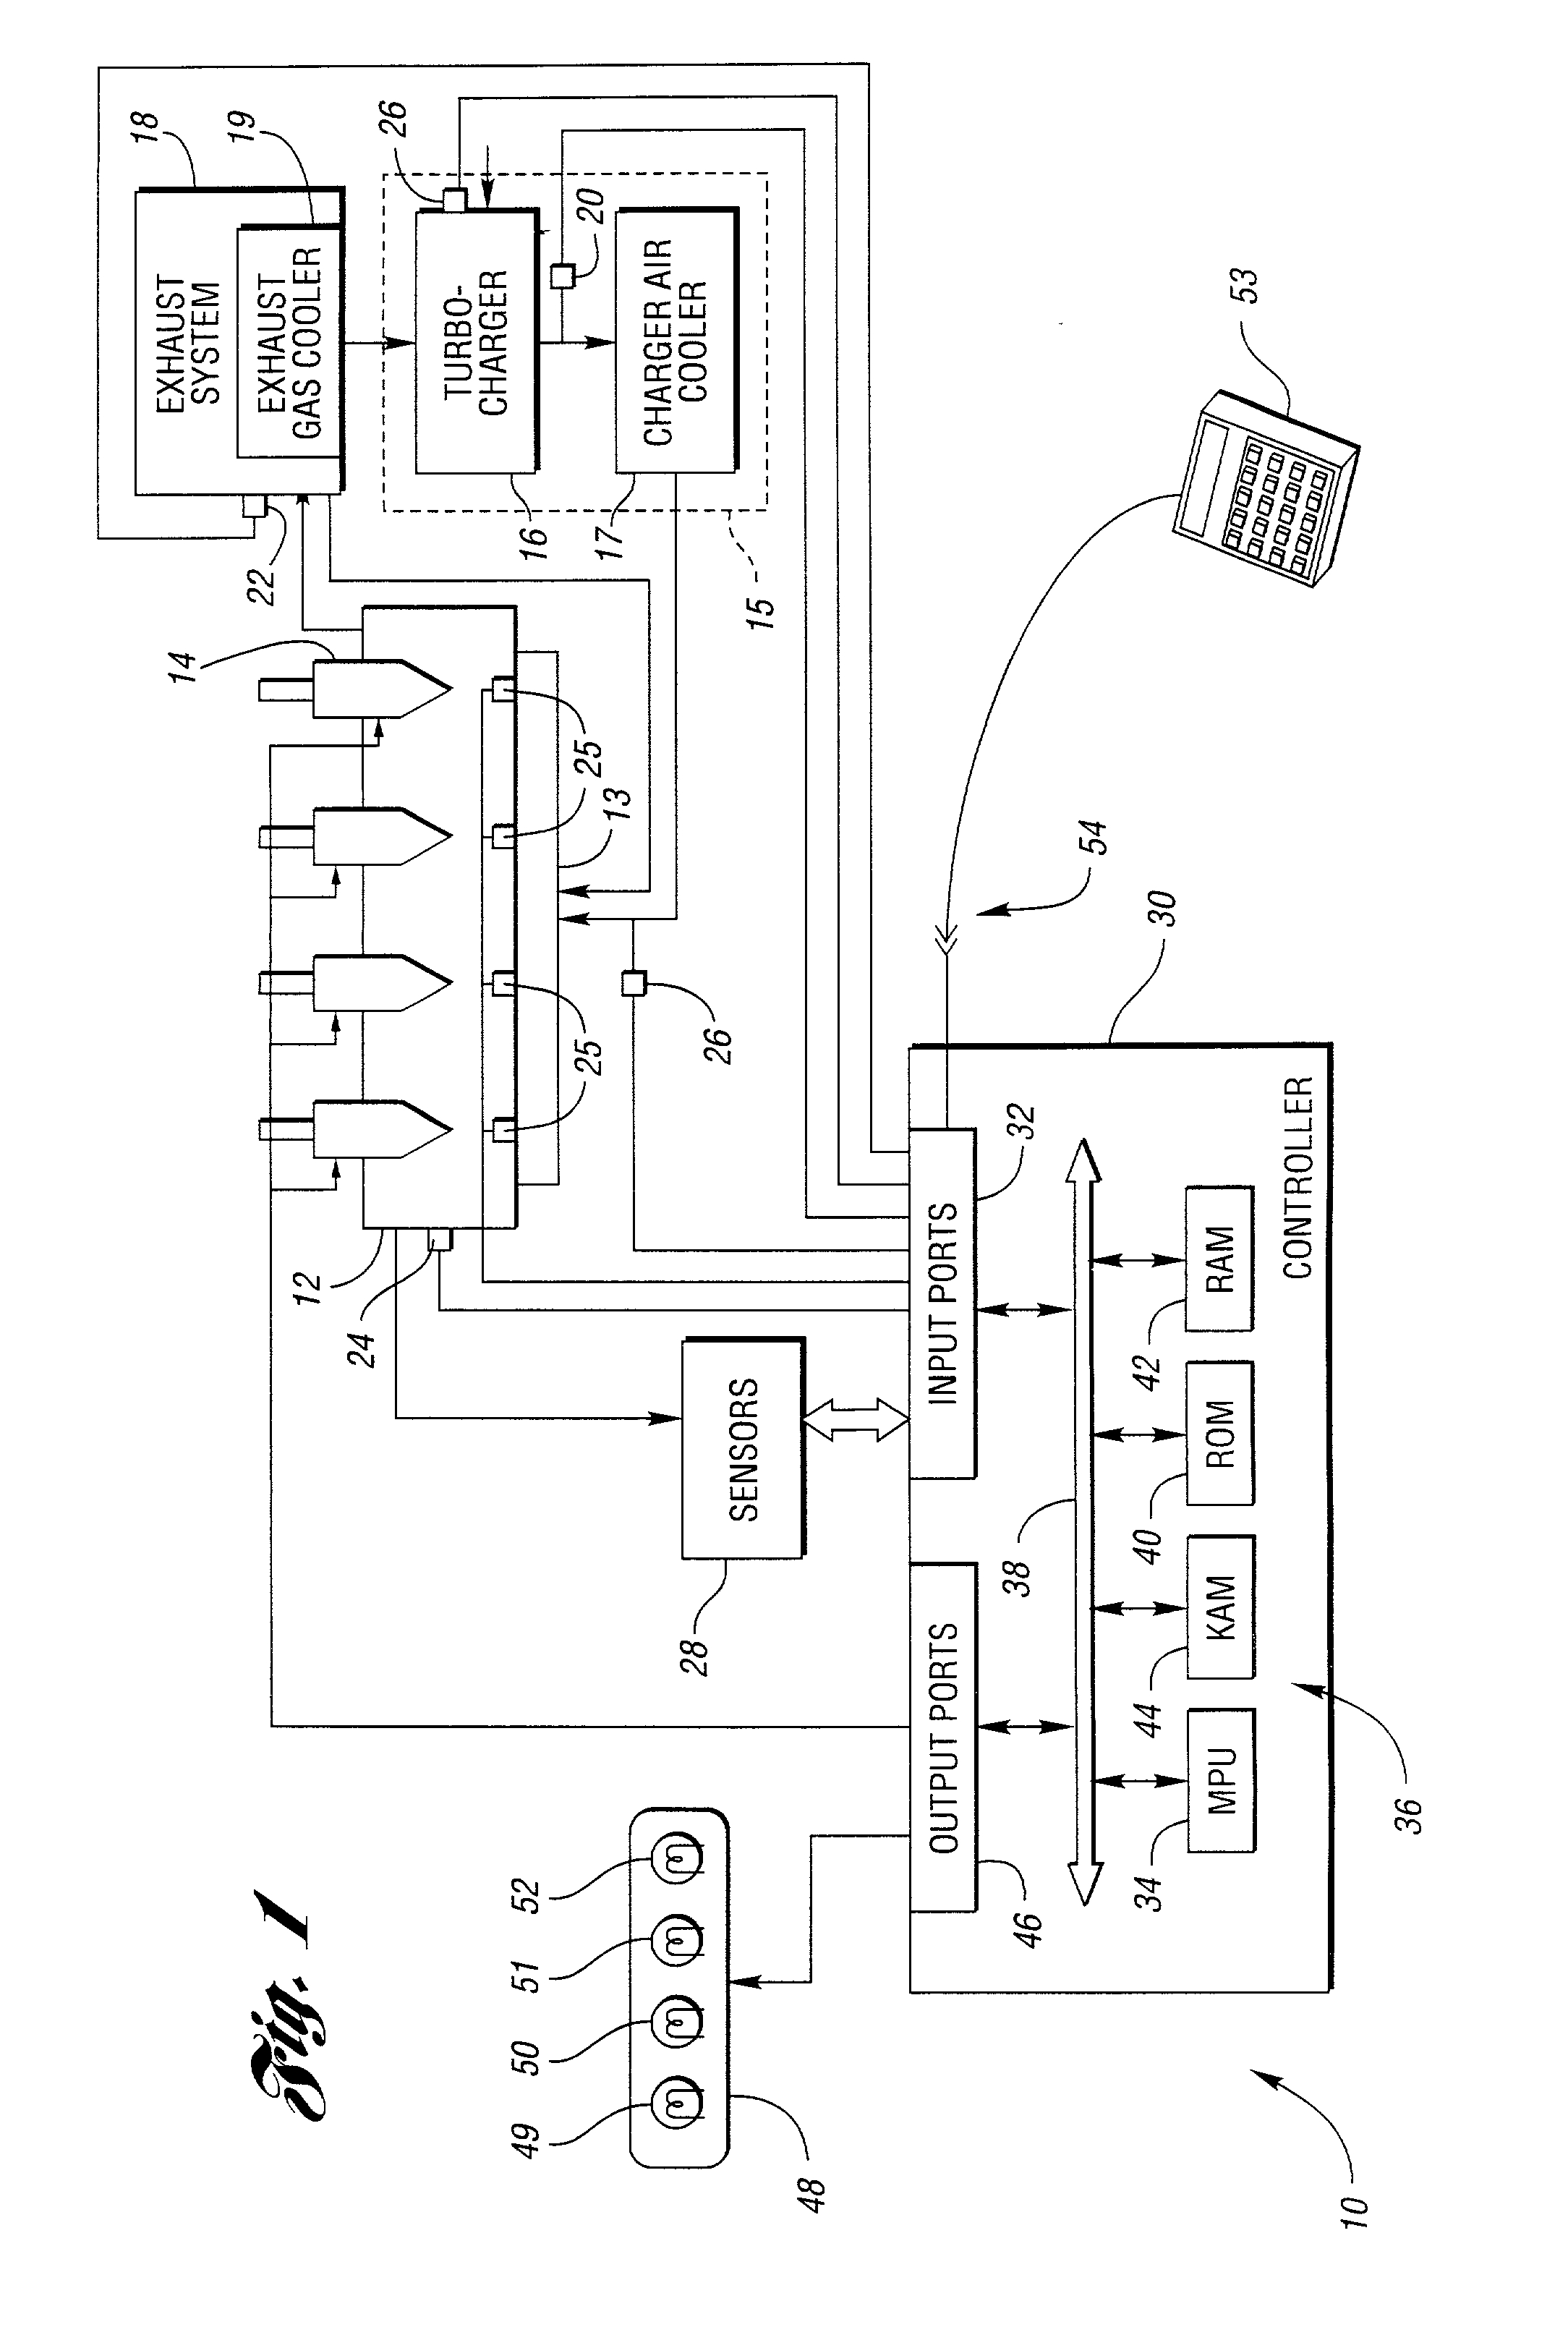 Method and system for enchanced engine control